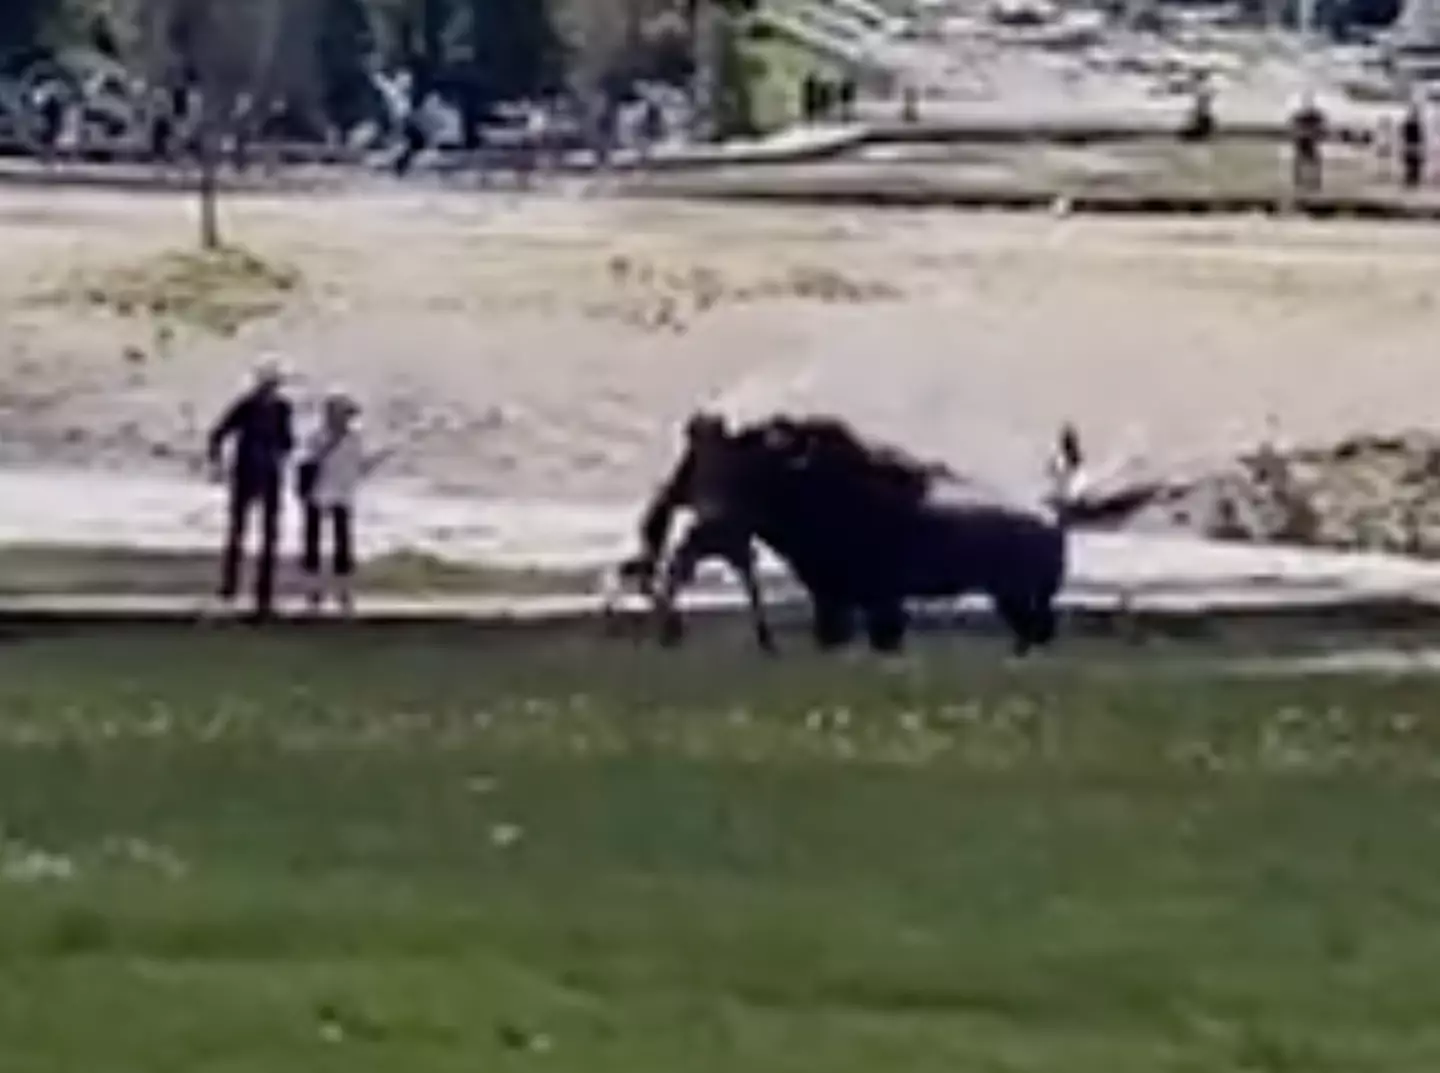 The family members remained in the area even after the bison charged towards them.